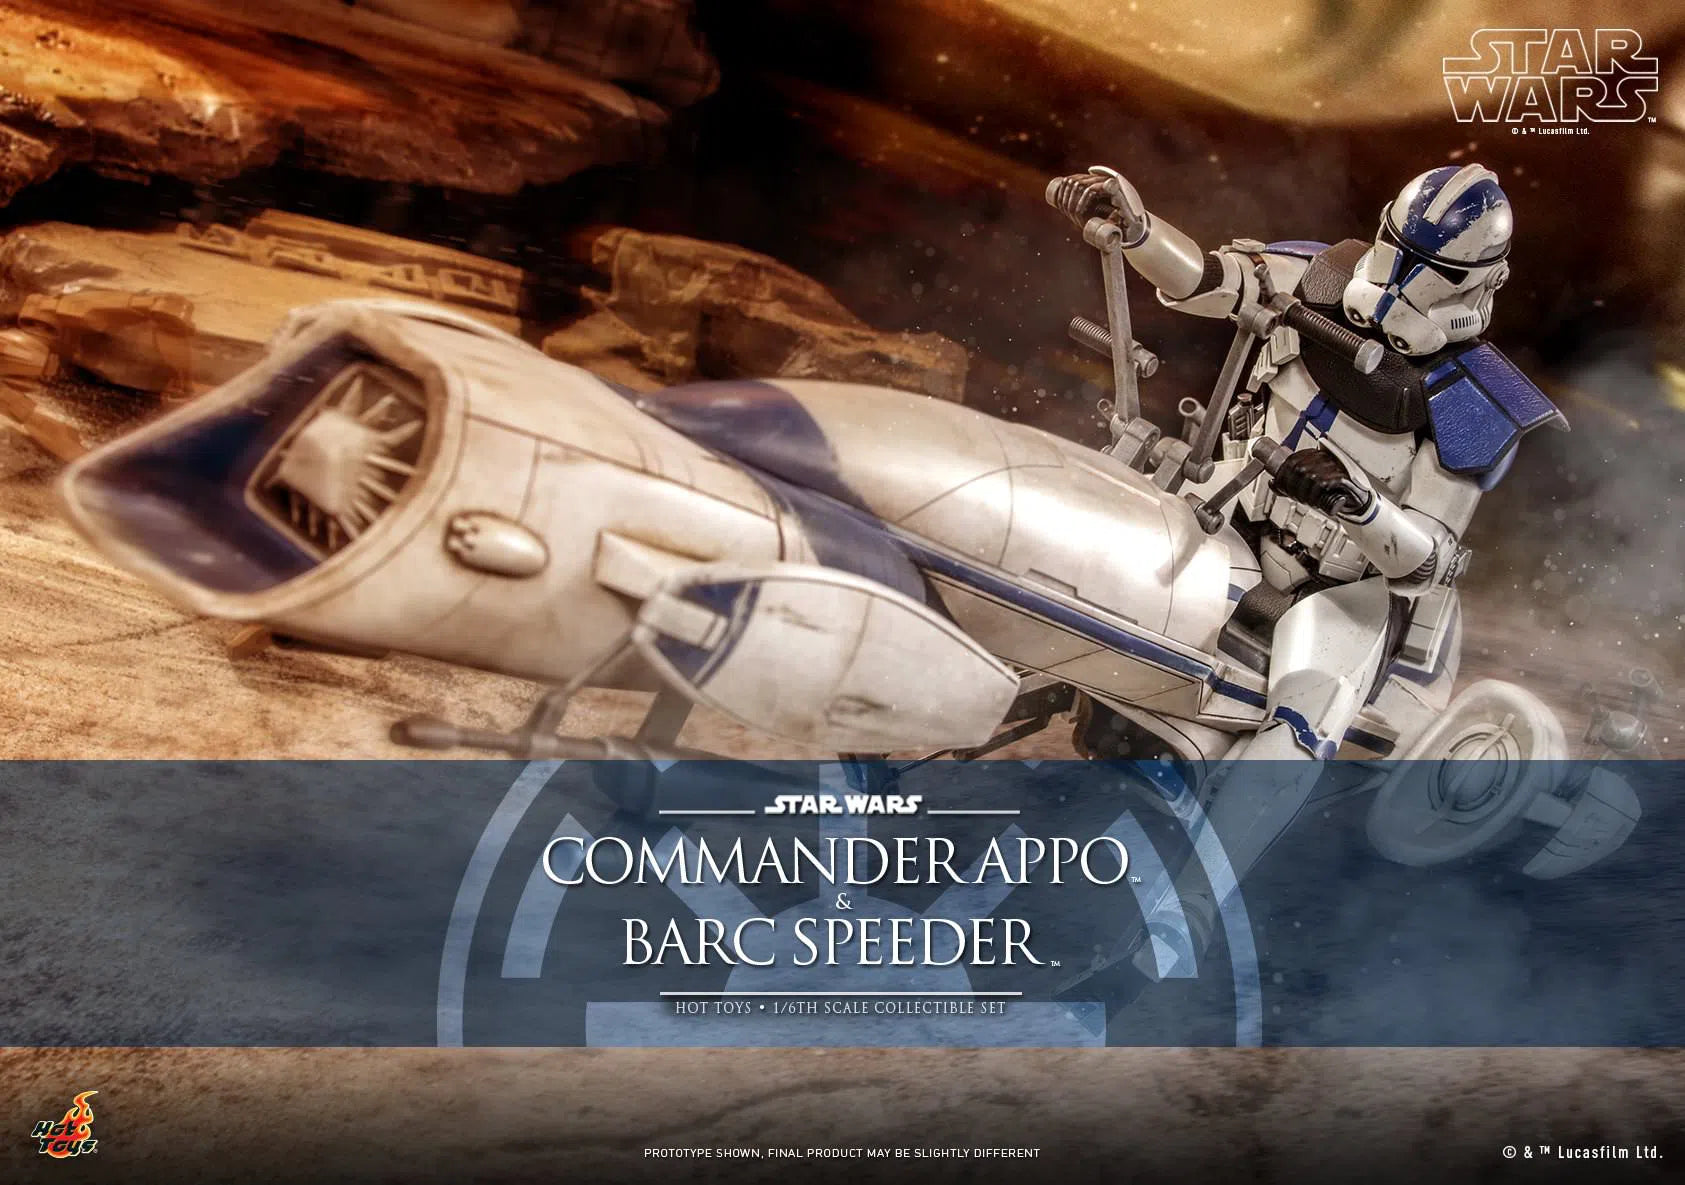 Commander Appo and Bard Speeder: Star Wars: TMS076: Hot Toys Hot Toys